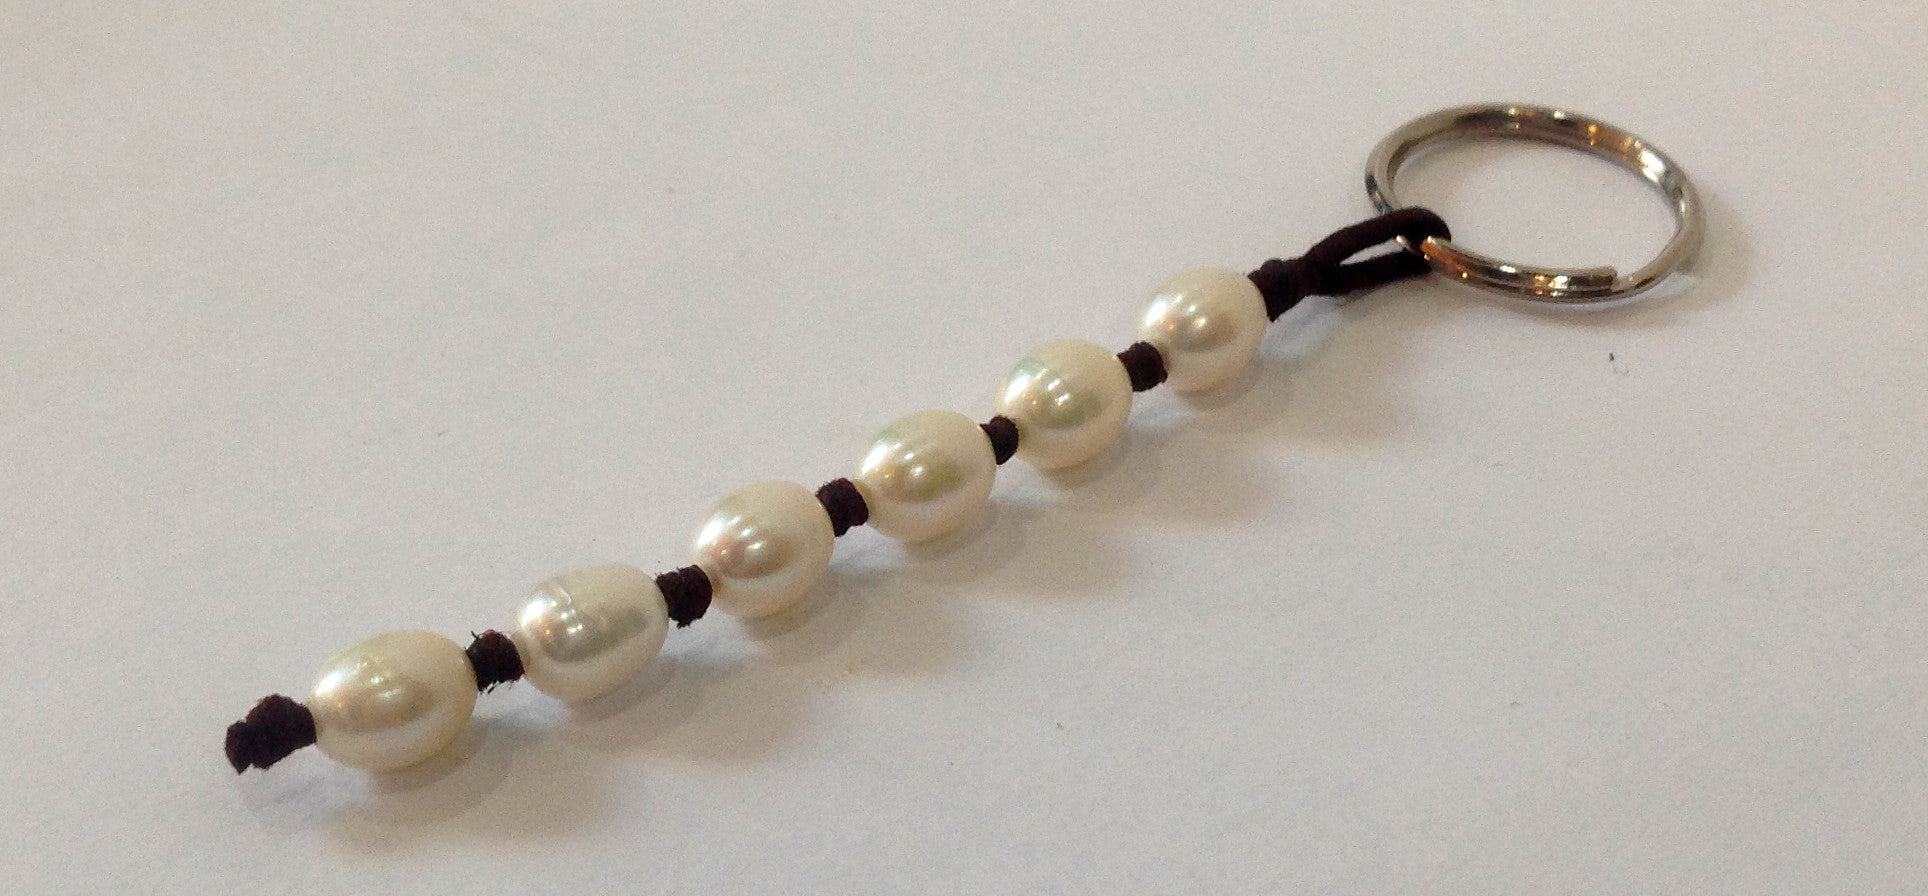 "Knot Another Classic" Freshwater Pearl and Leather Keychain - Klara Haloho - 2